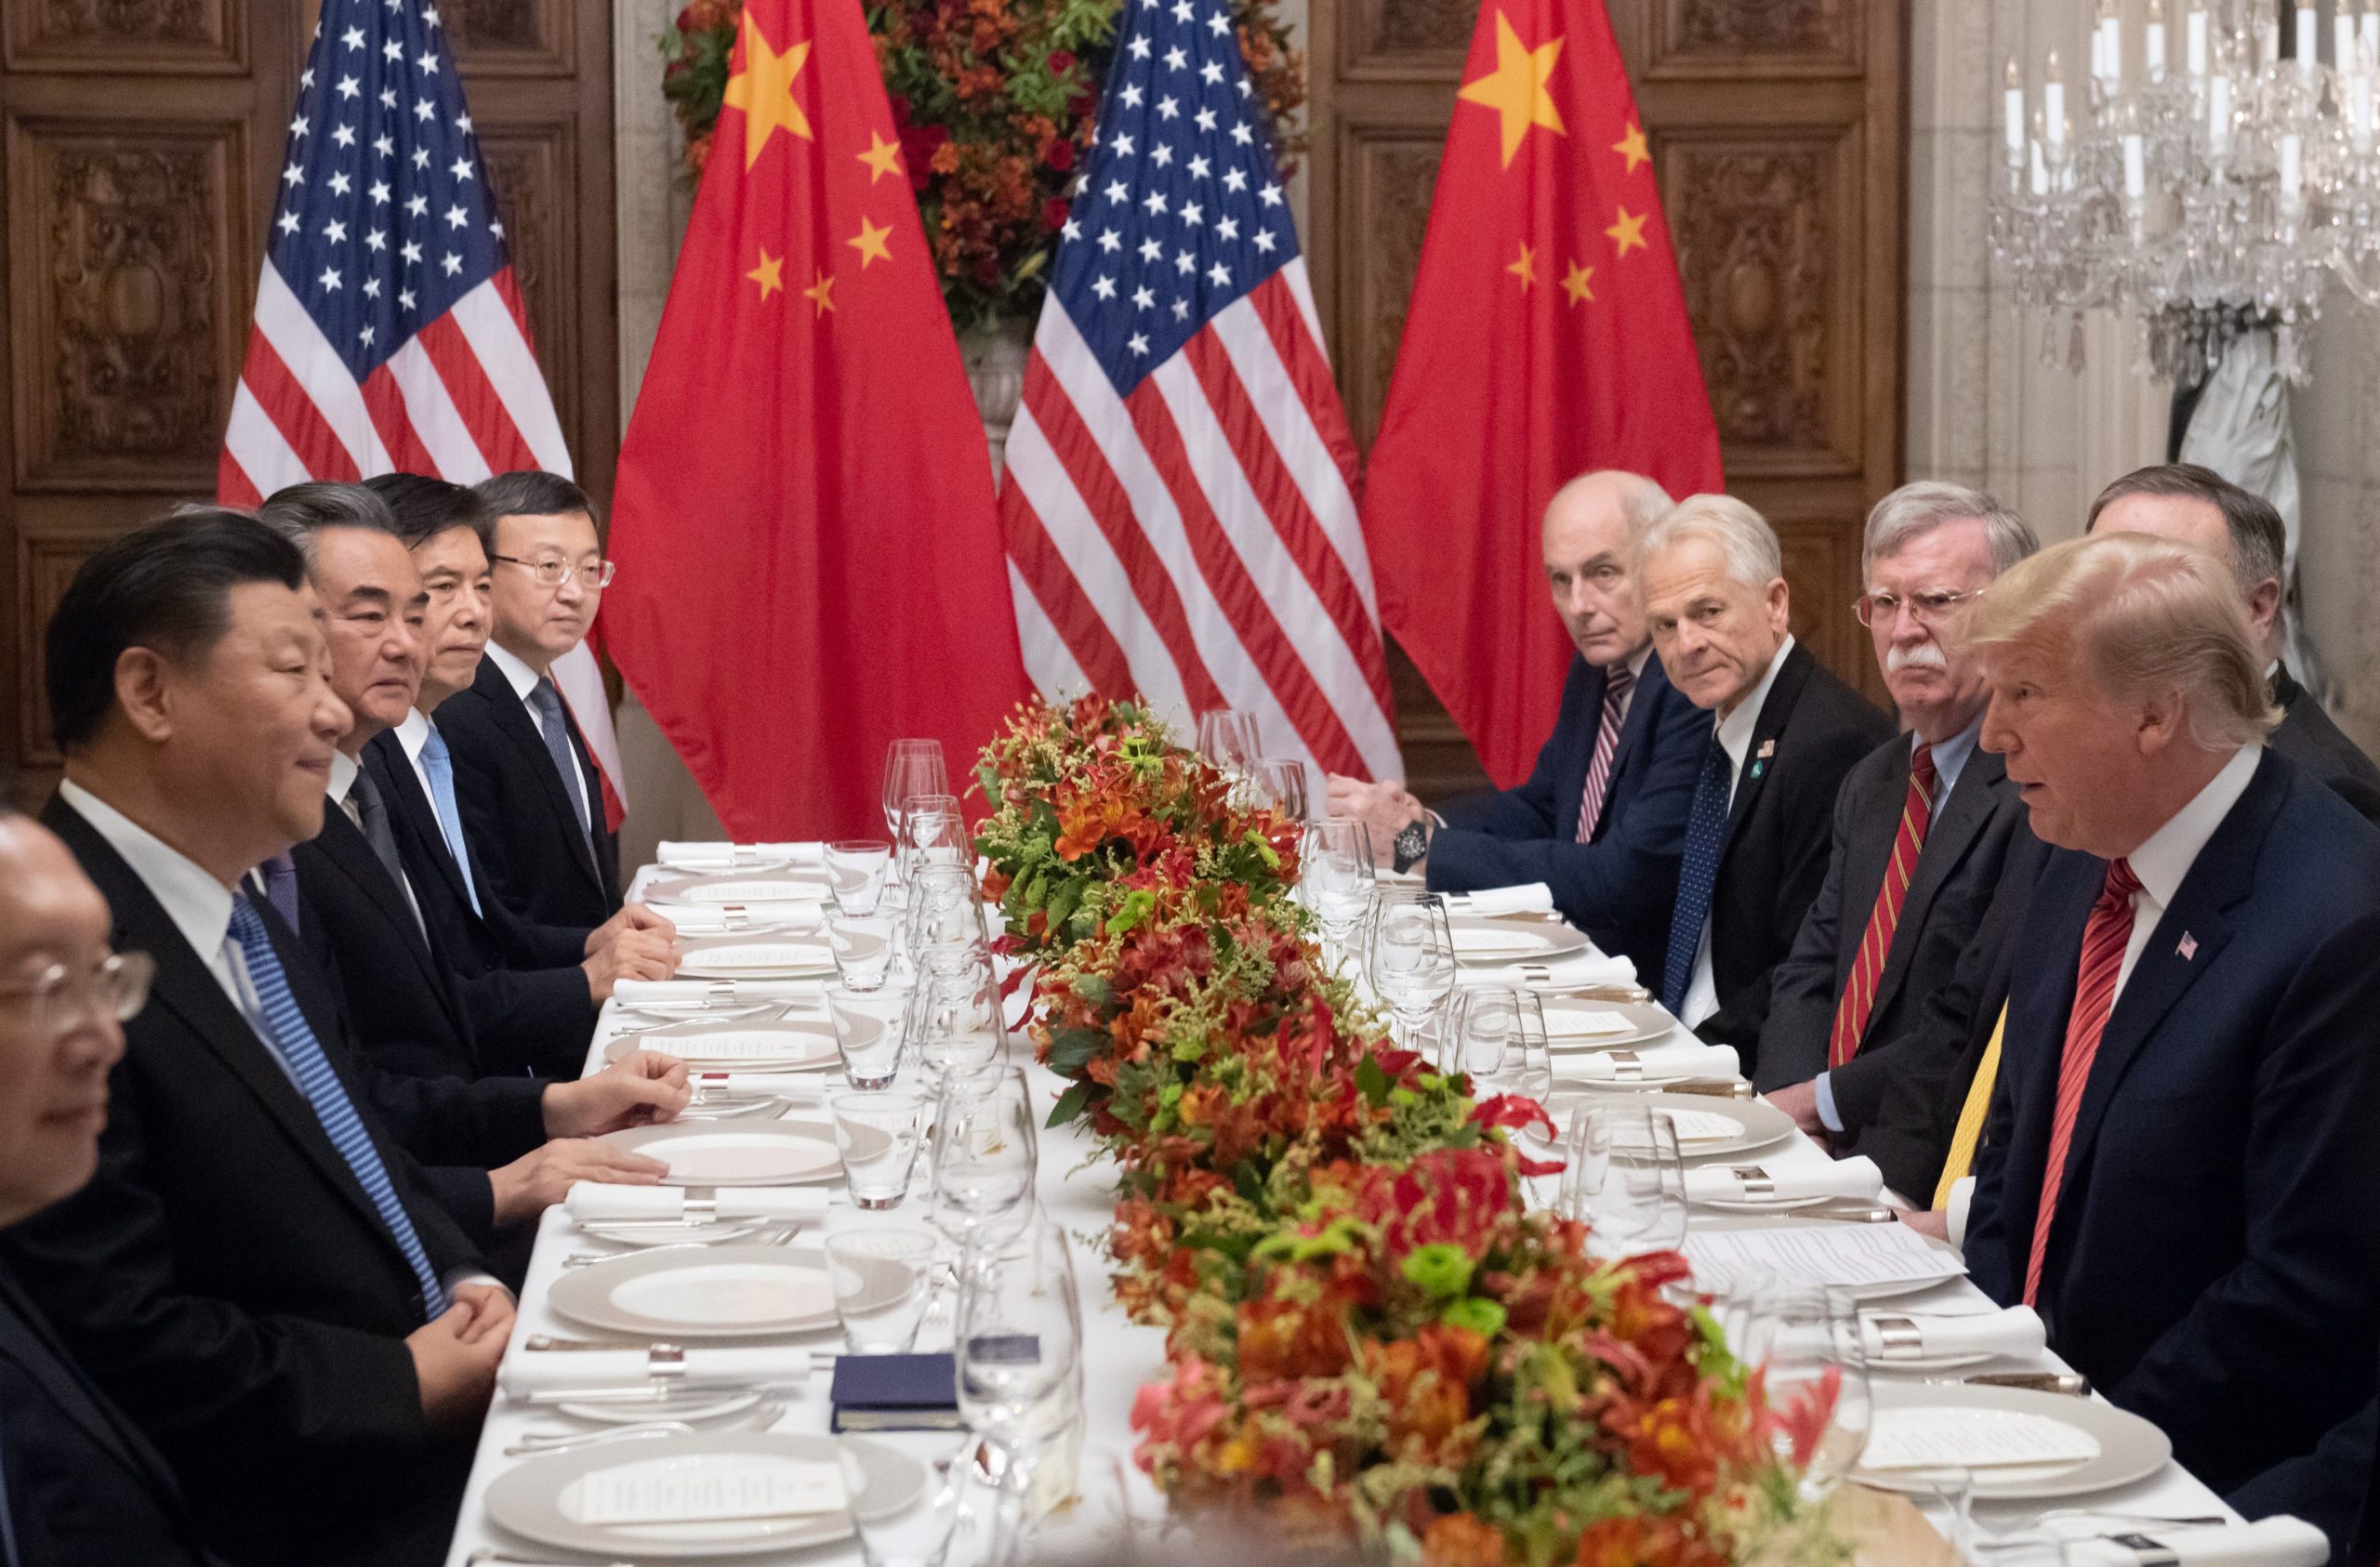 U.S. President Donald Trump and China's President Xi Jinping along with members of their delegations, hold a dinner meeting at the end of the G20 Leaders' Summit in Buenos Aires, on December 01, 2018. (Photo by SAUL LOEB/AFP via Getty Images)